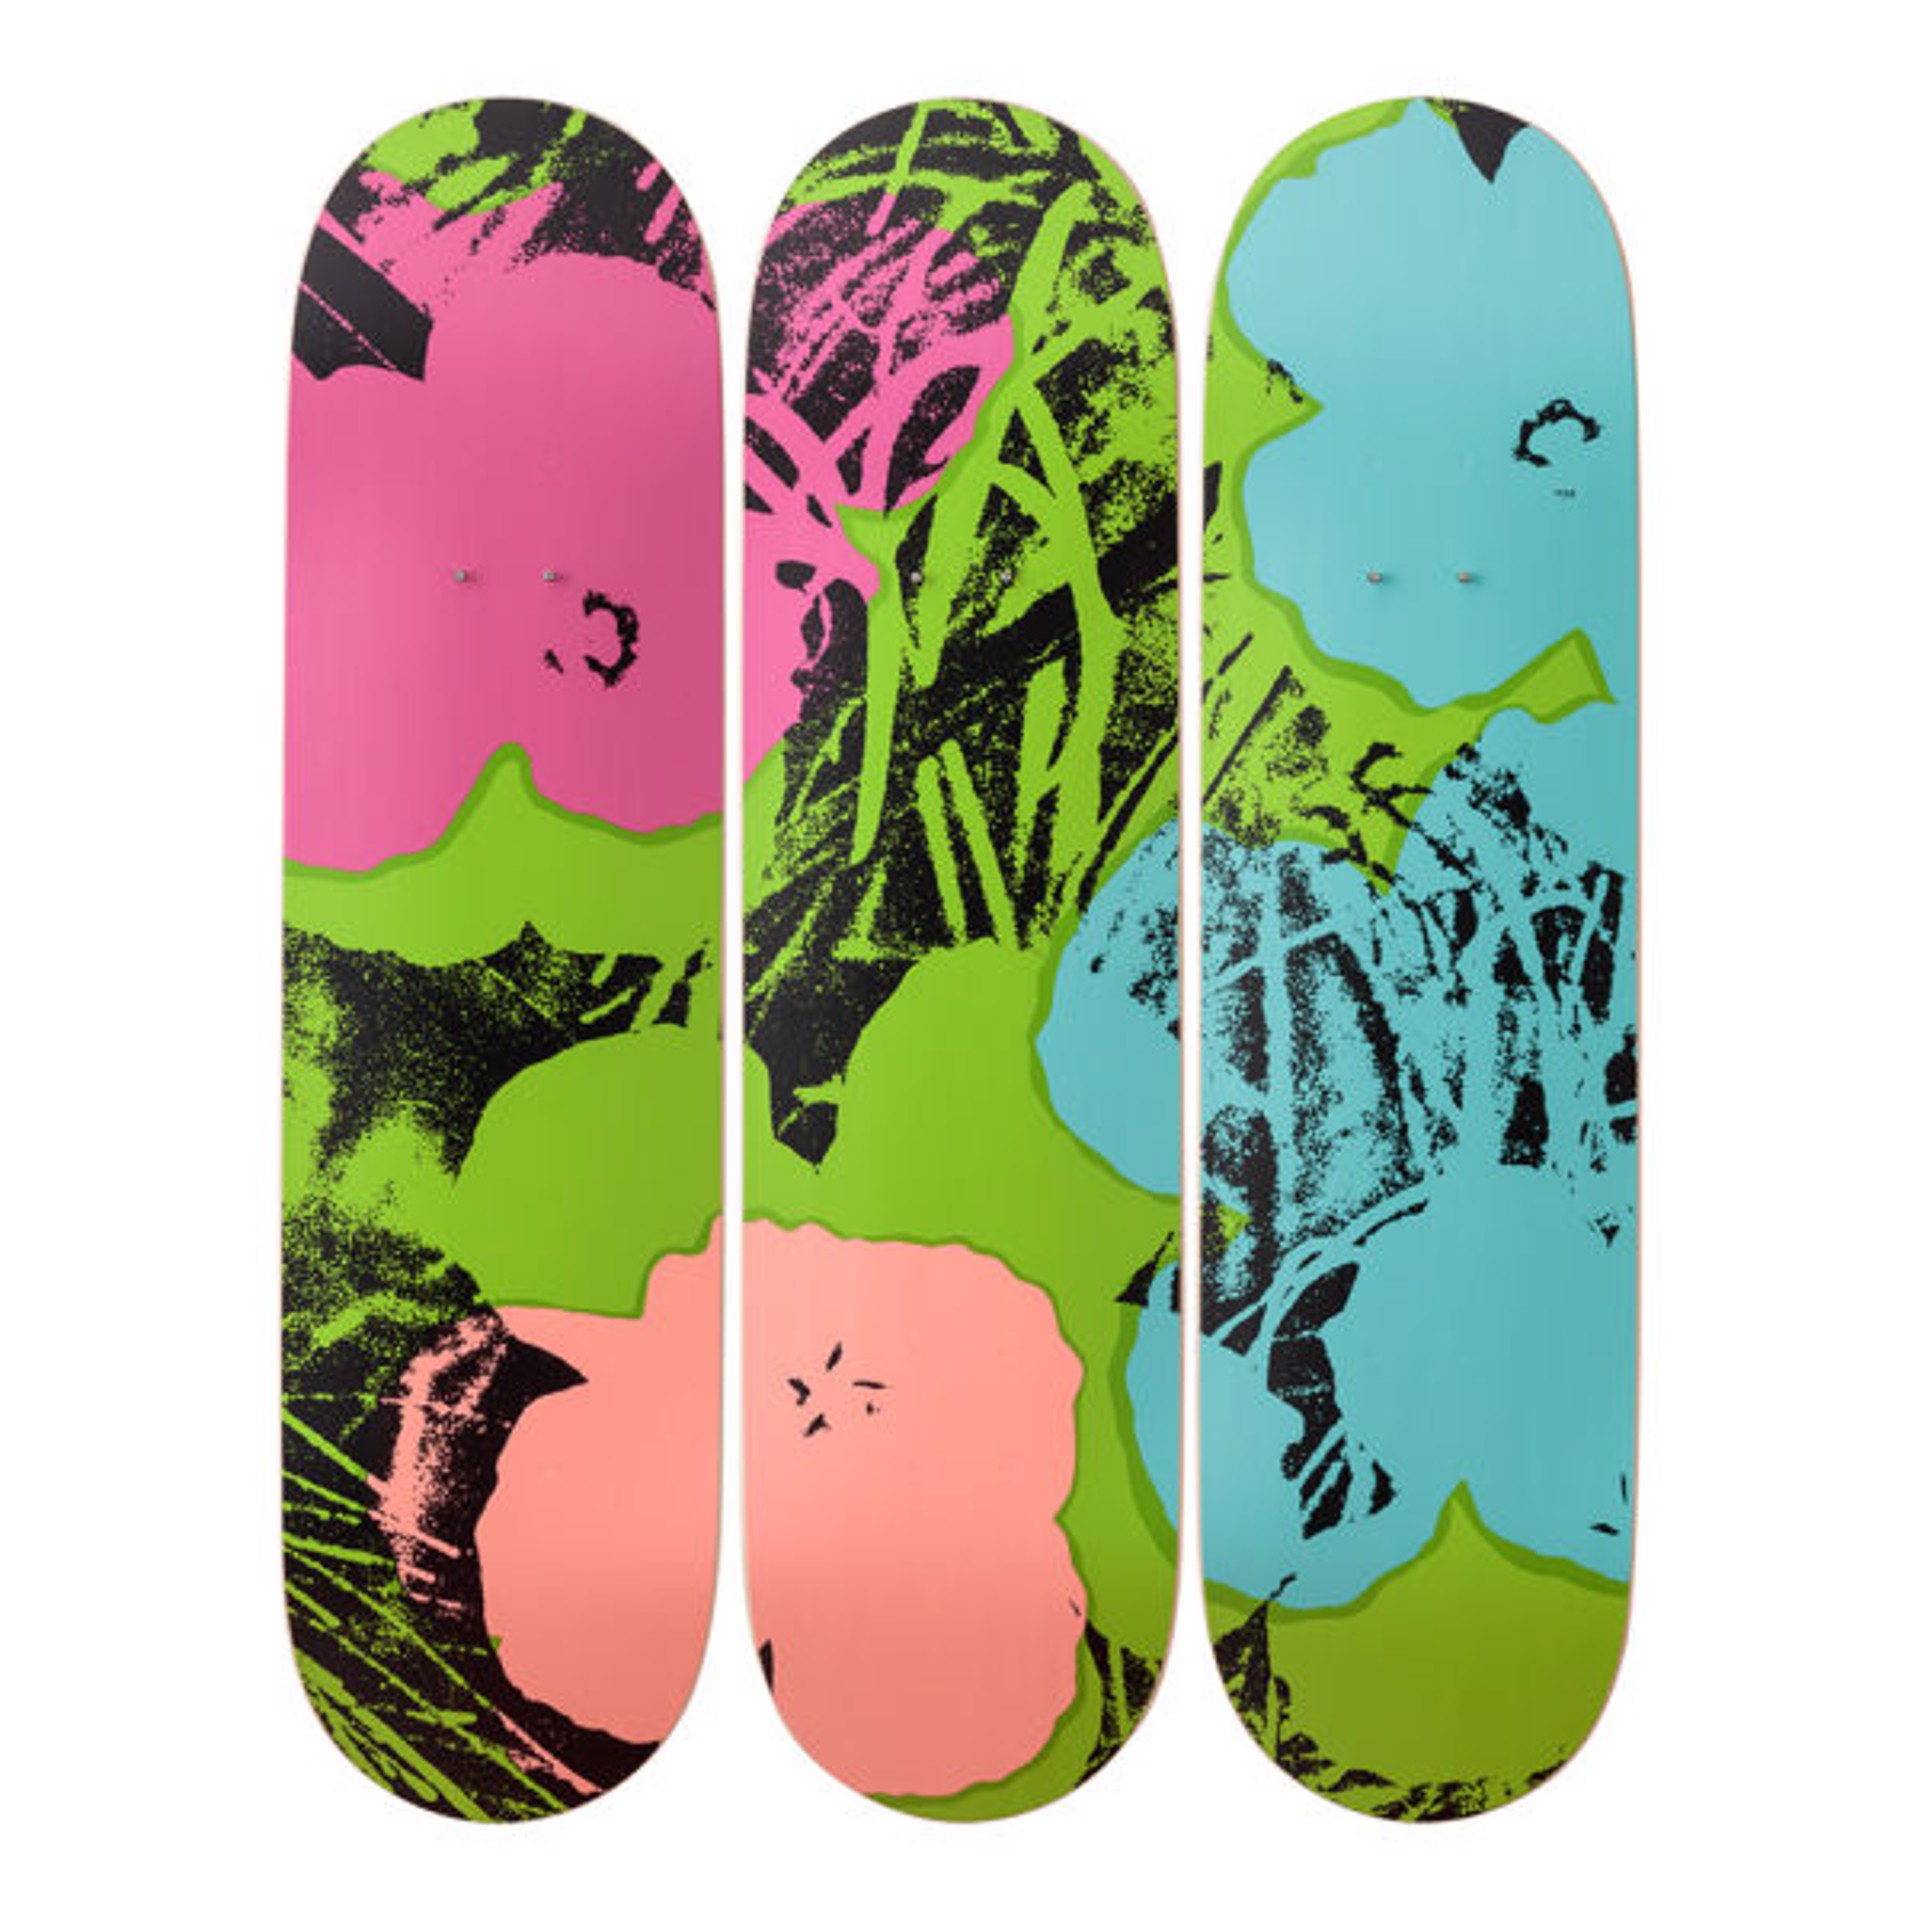 Flowers Skate Deck (Green/Pink) by Andy Warhol